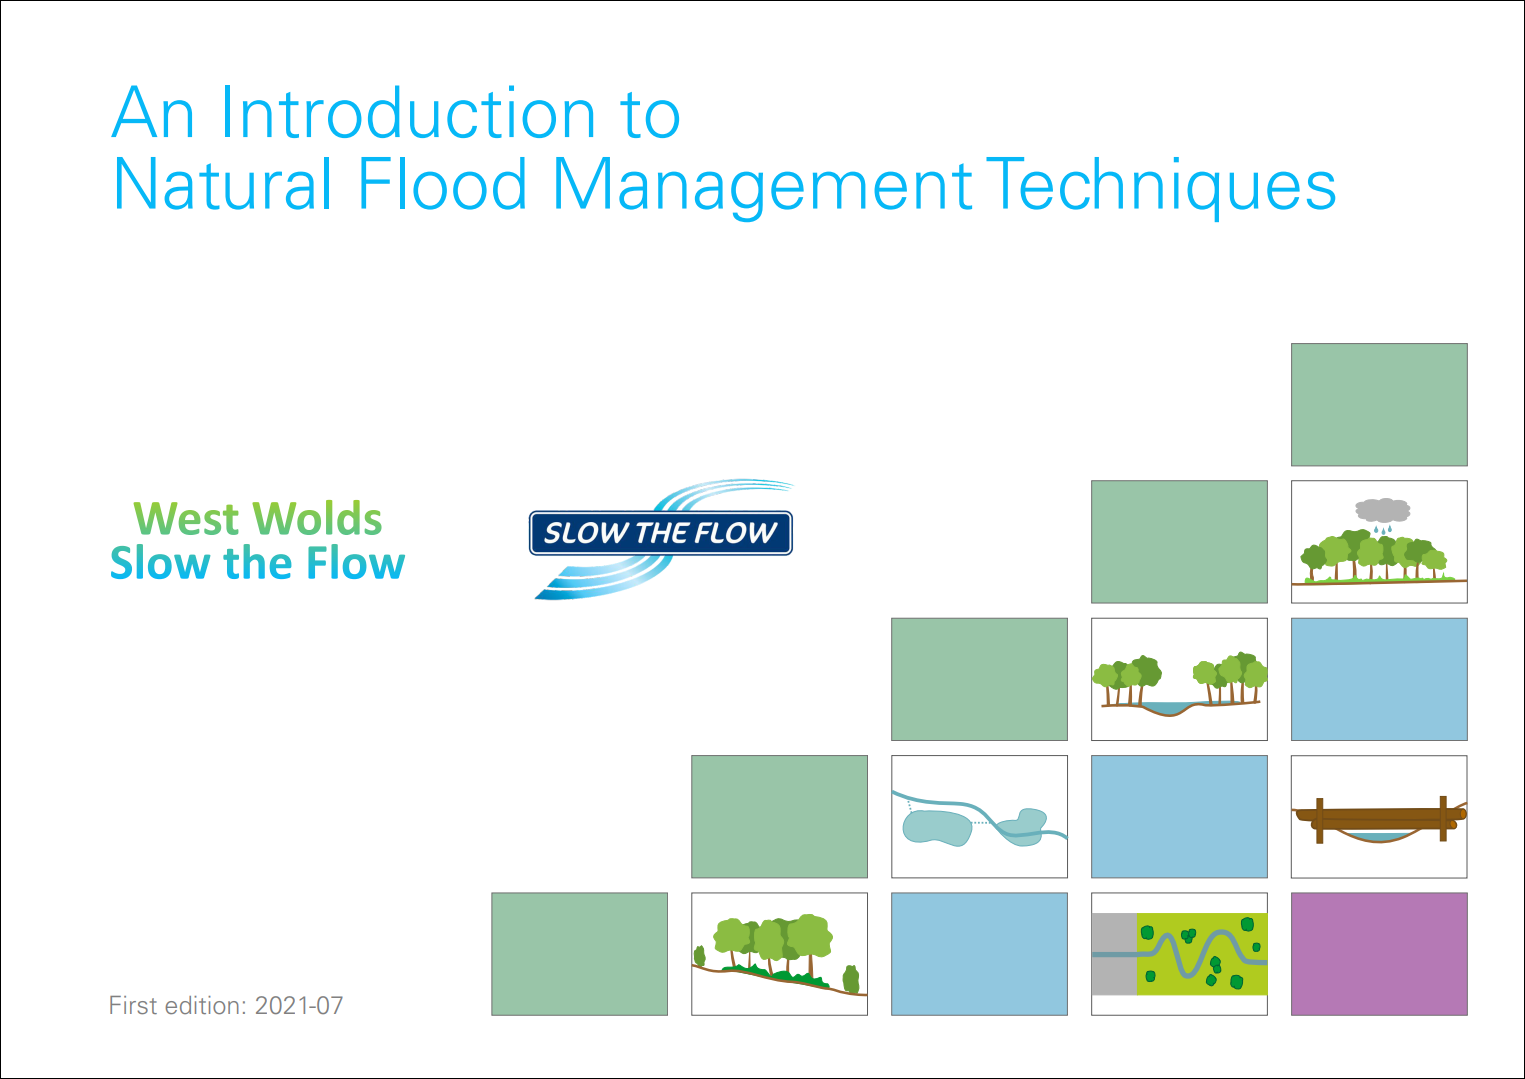 An Introduction to Natural Flood Management Techniques